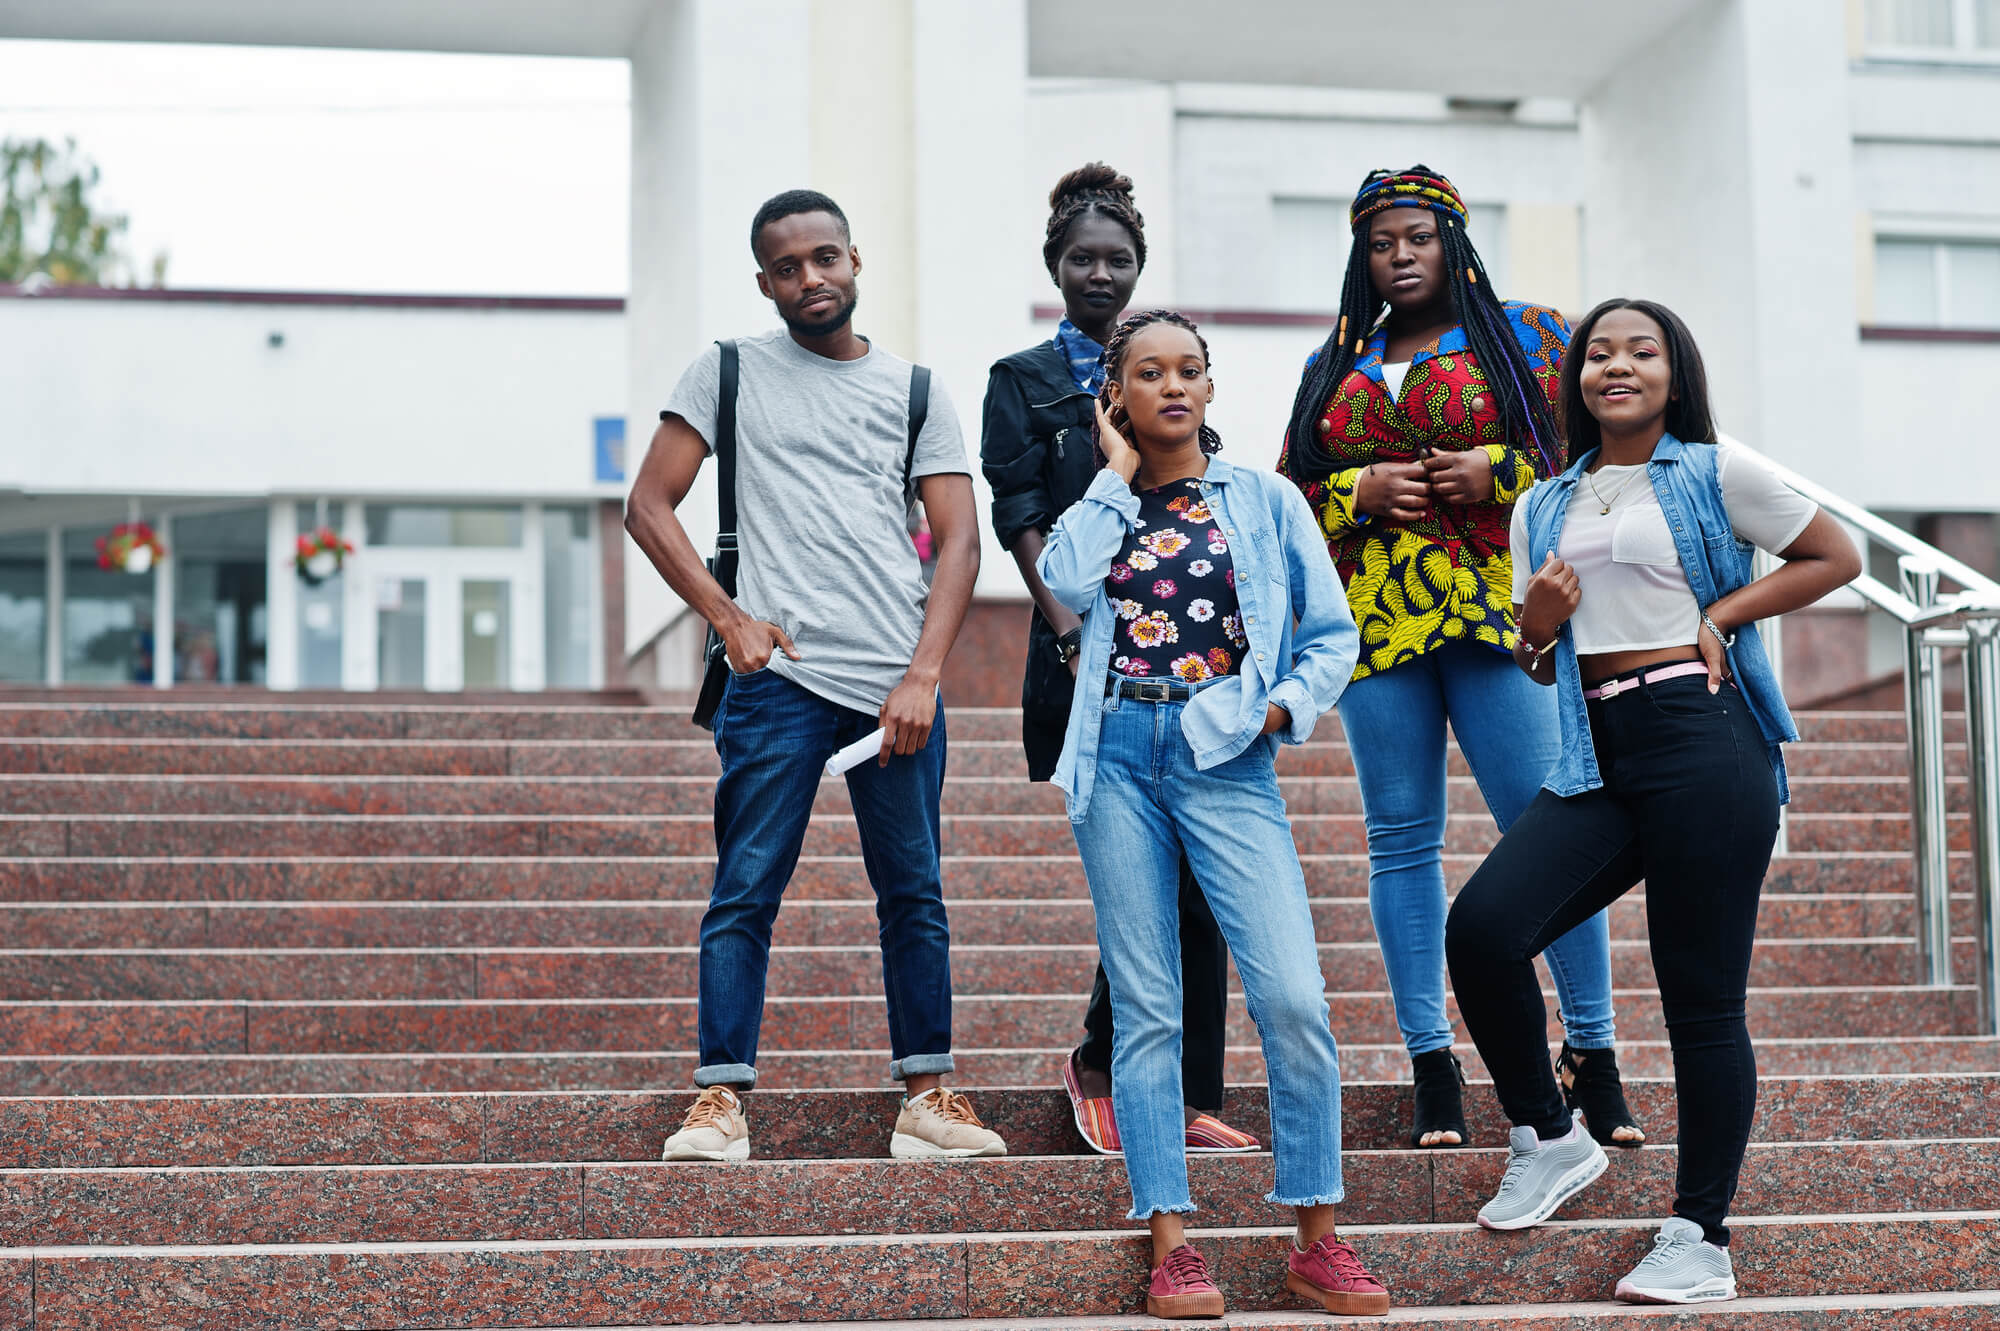 group-five-african-college-students-spending-time-together-campus-university-yard-black-afro-friends-studying-education-theme (1)